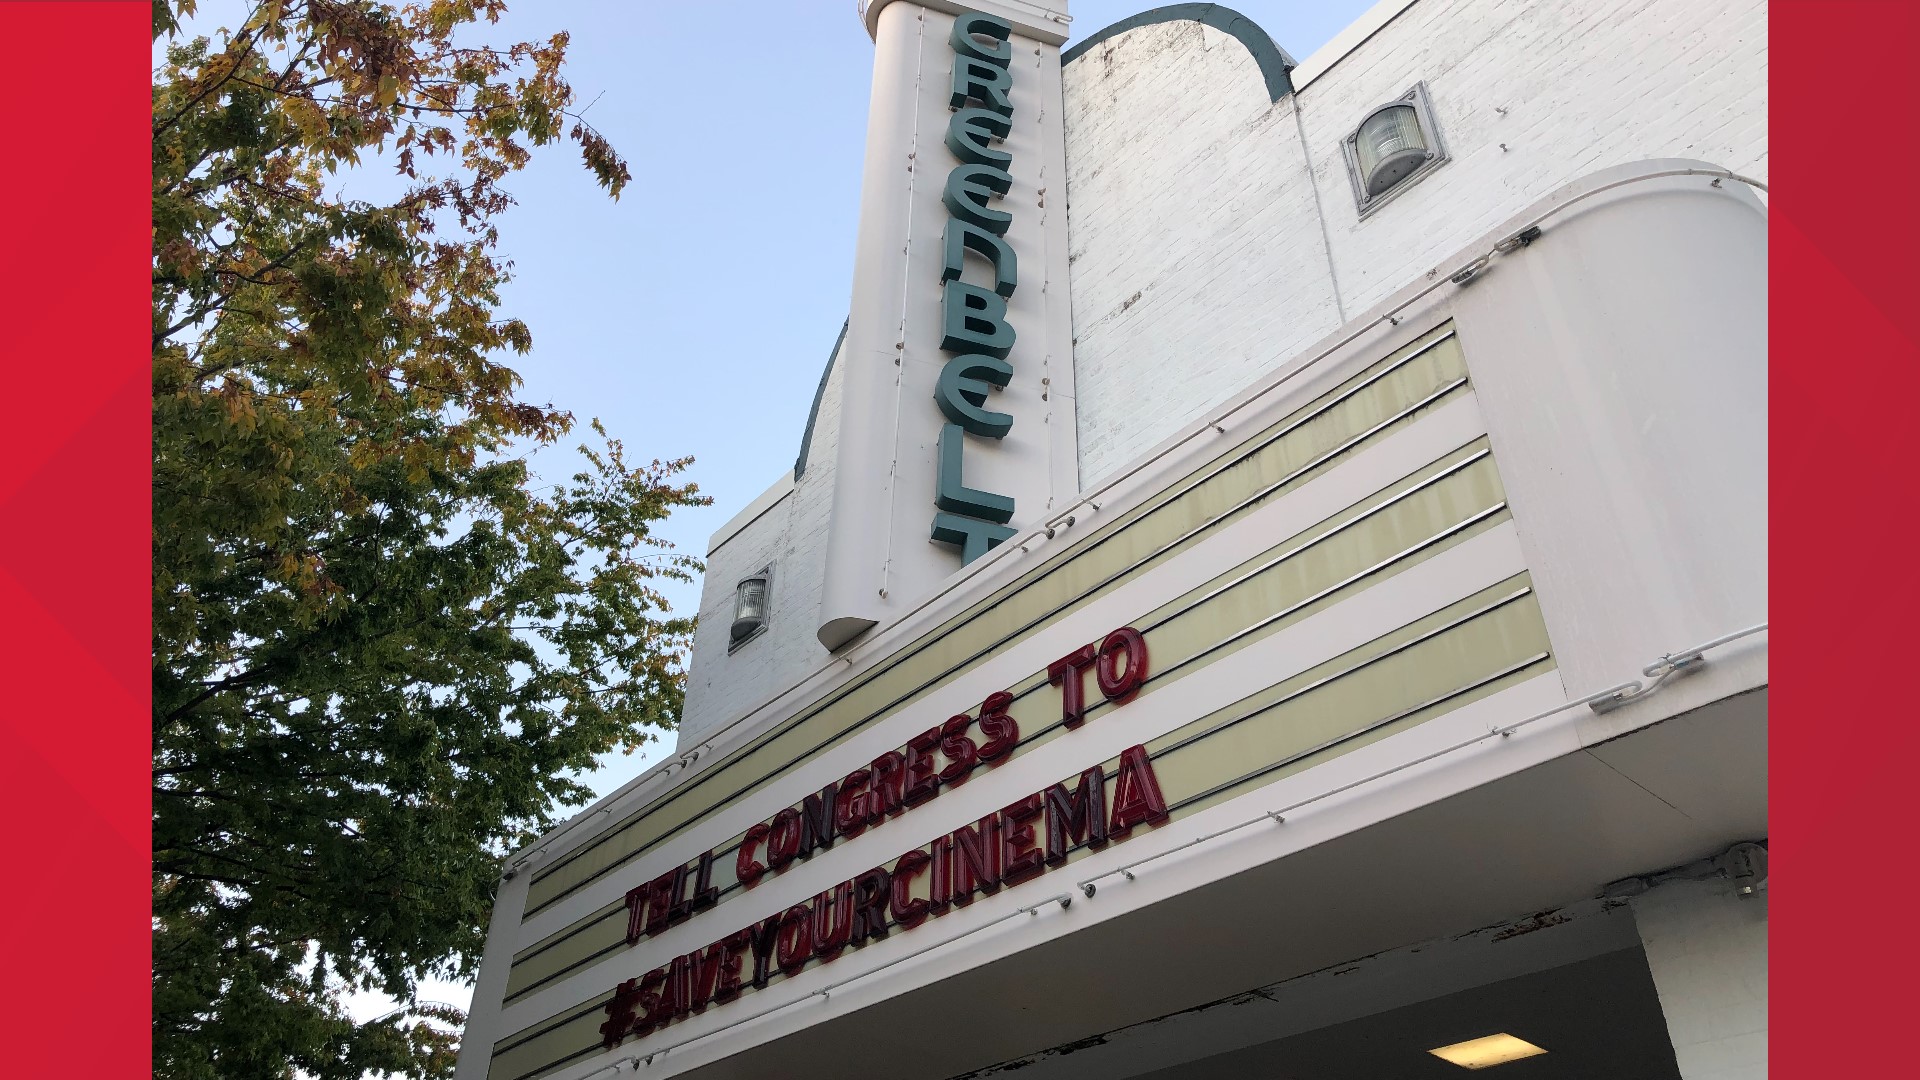 The Old Greenbelt Theatre remains closed after the pandemic forced it to shut down in mid-March. As a result, organizers say tough decisions have had to be made.